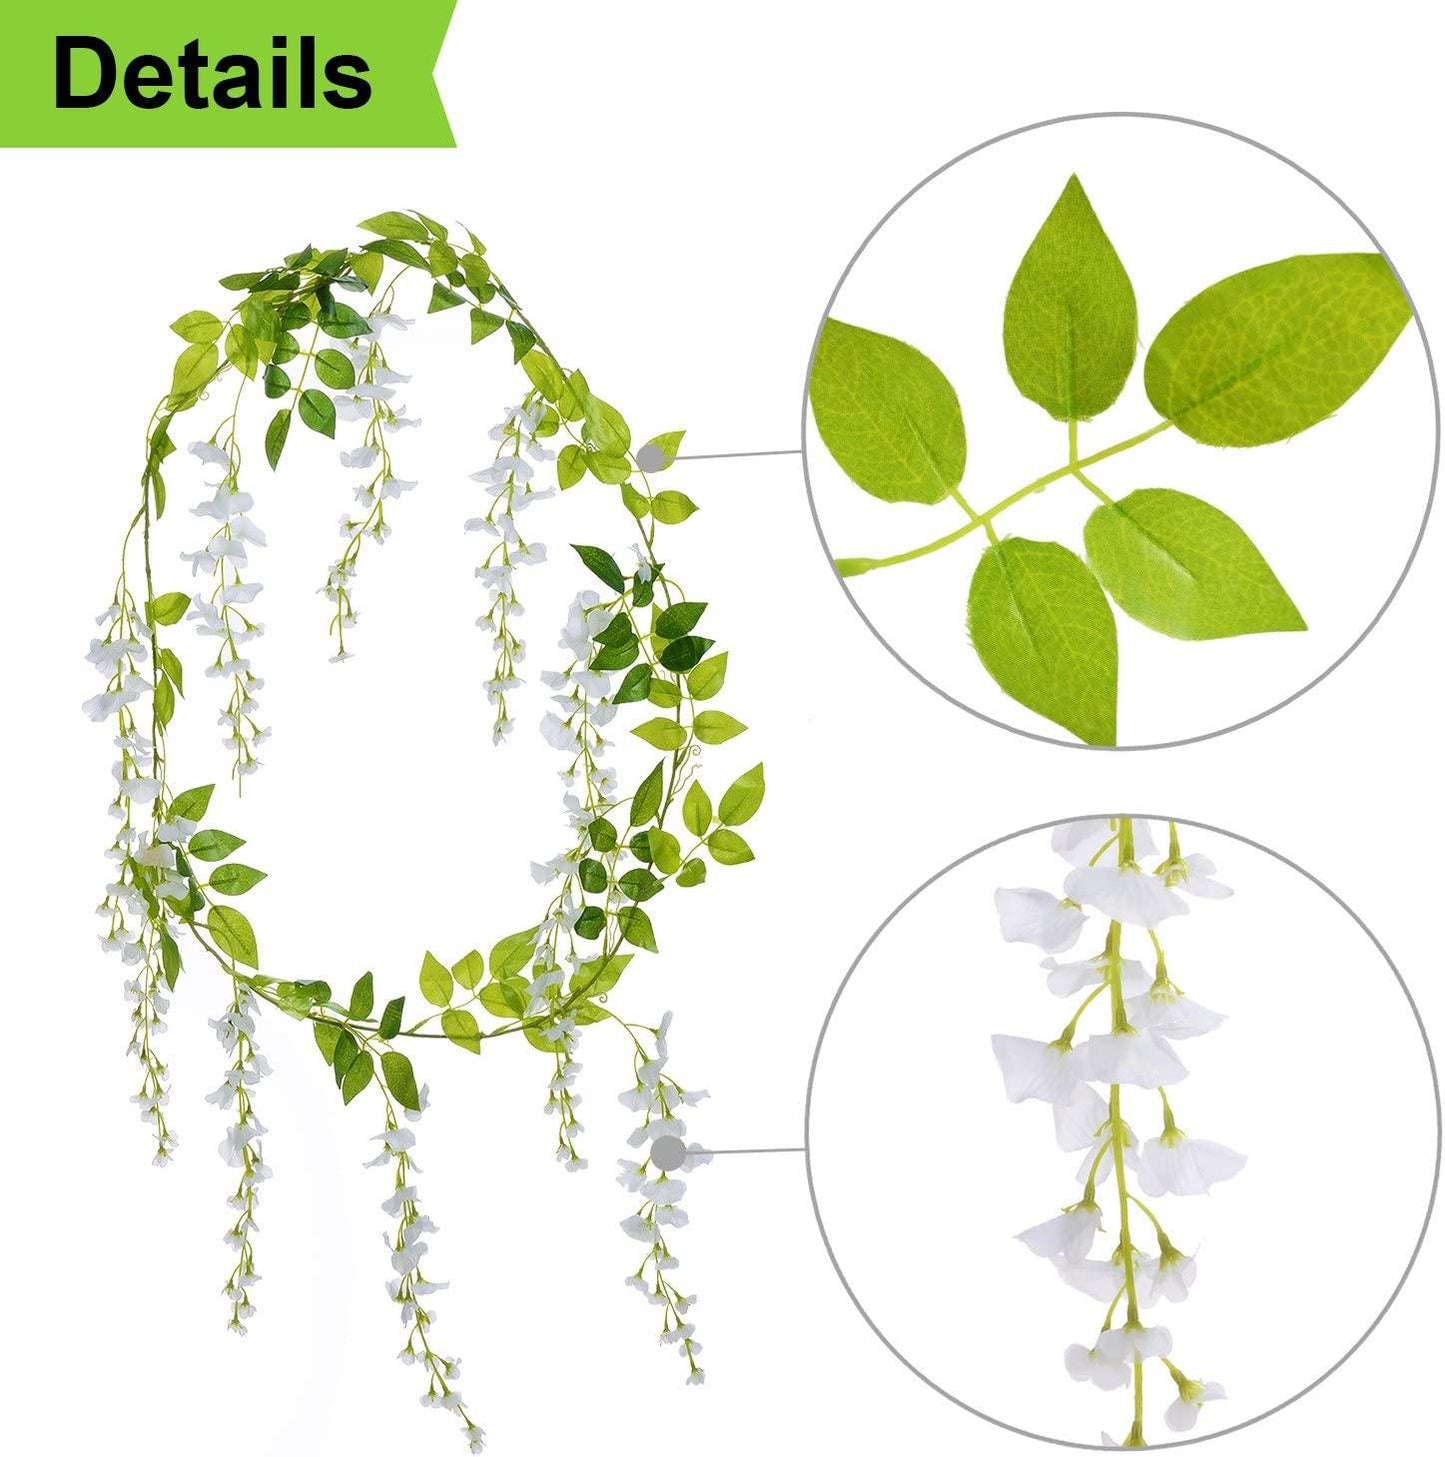 4Pcs Wisteria Artificial Flowers Garland, Total 28.8ft White Artificial Wisteria Vine Silk Hanging Flower for Wedding - If you say i do